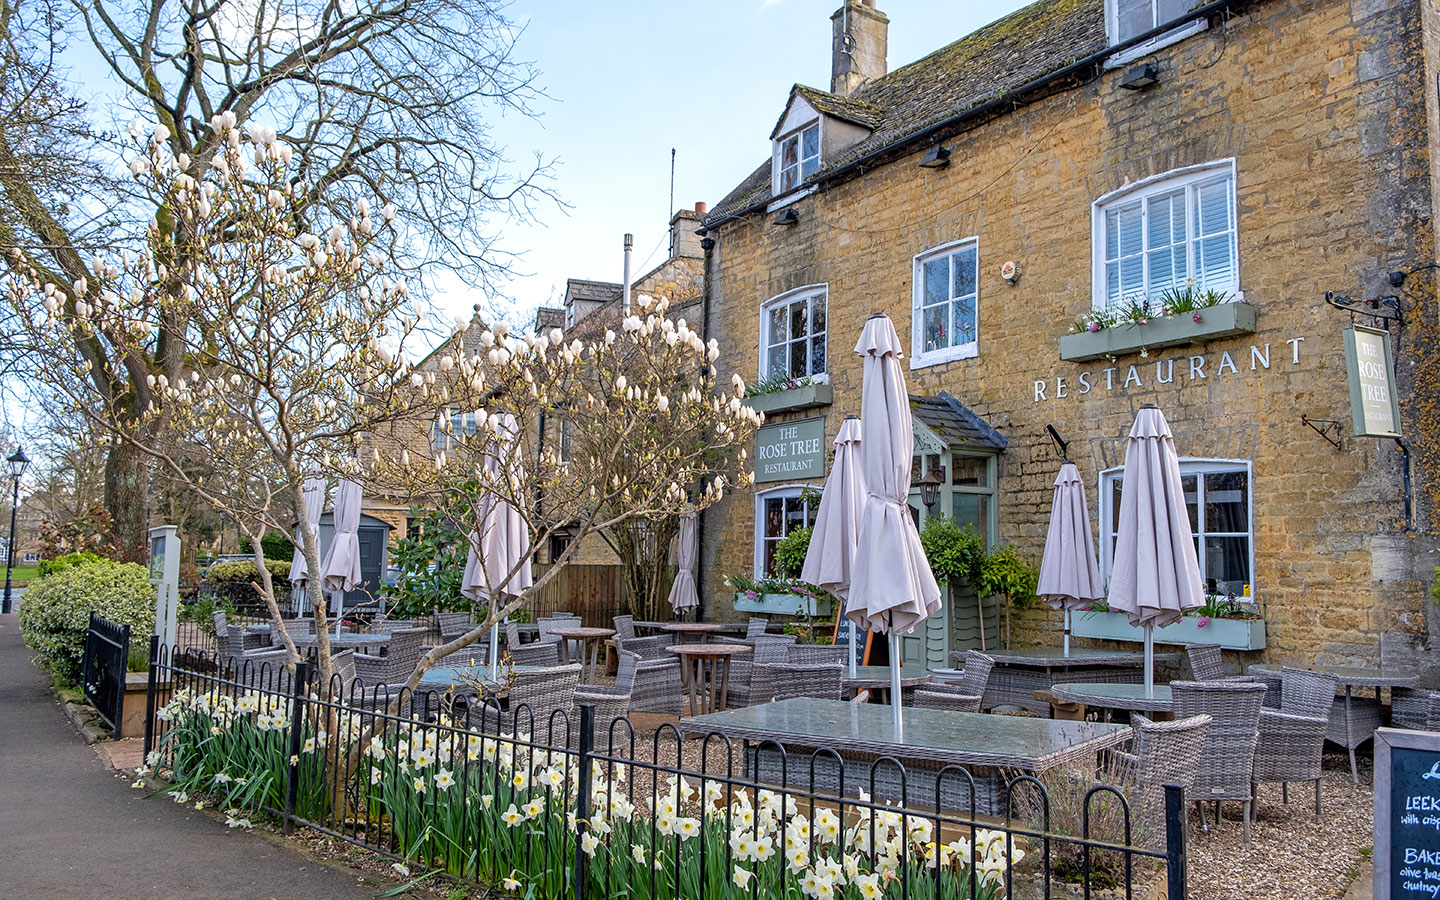 The Rose Tree restaurant – places to eat in Bourton-on-the-Water